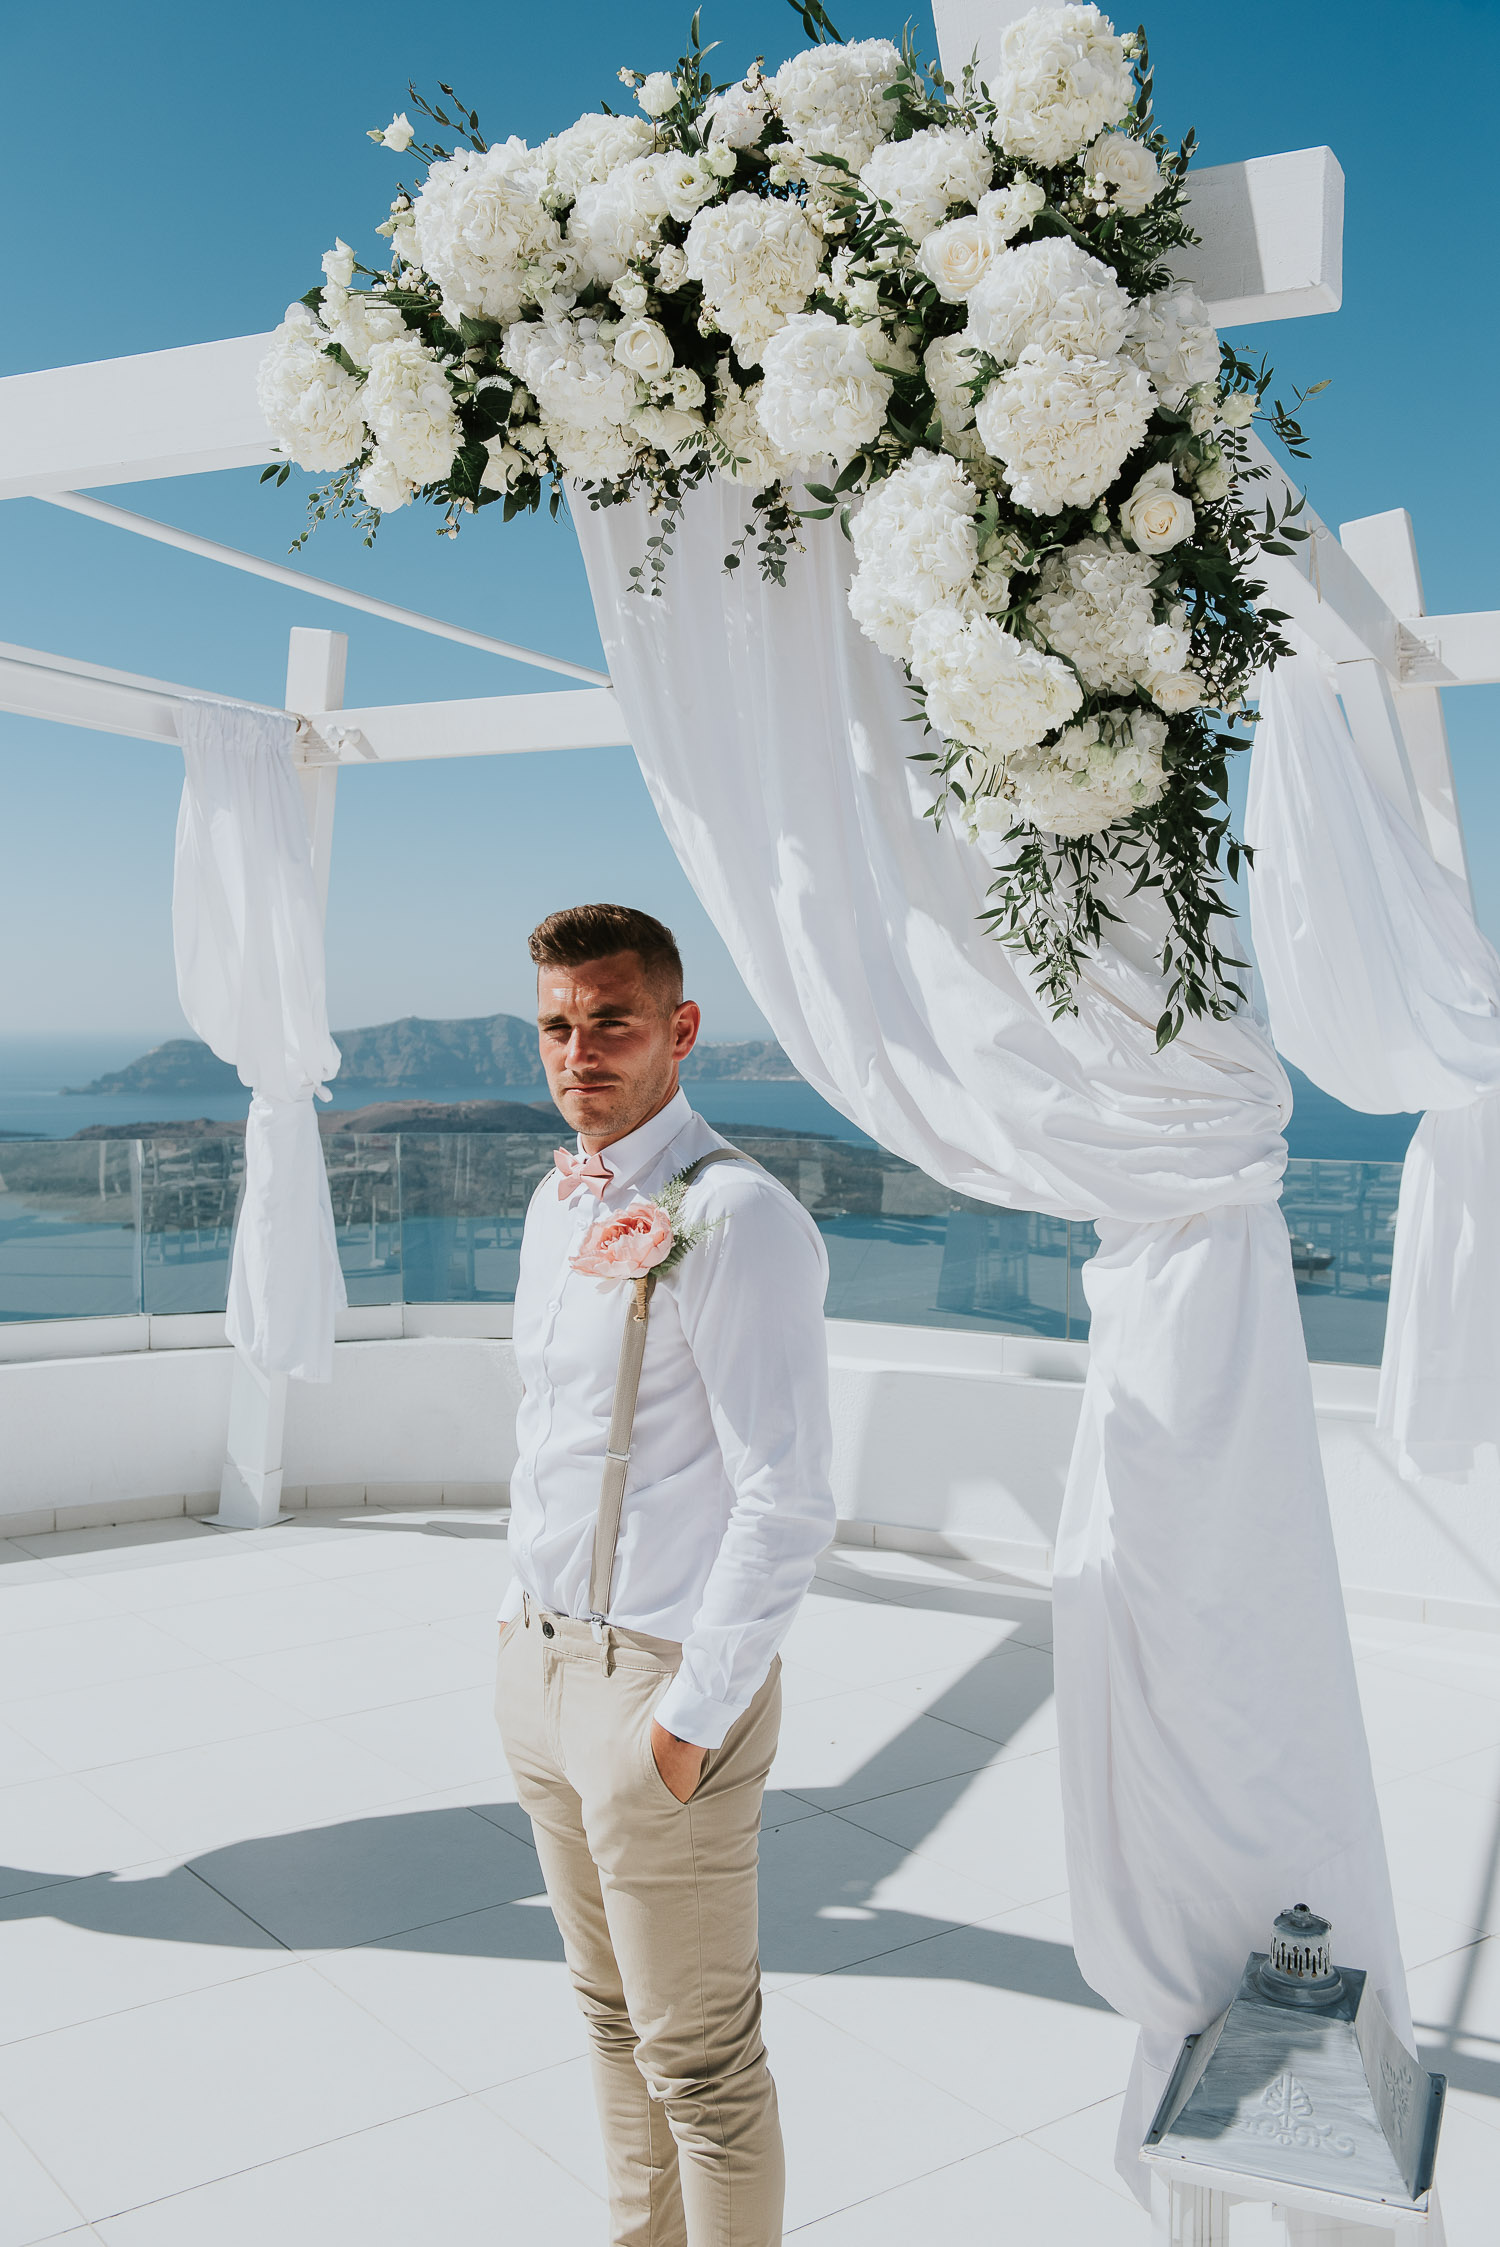 Wedding photographer Santorini: close up of groom under gazebo covered in flowers by Ben and Vesna.